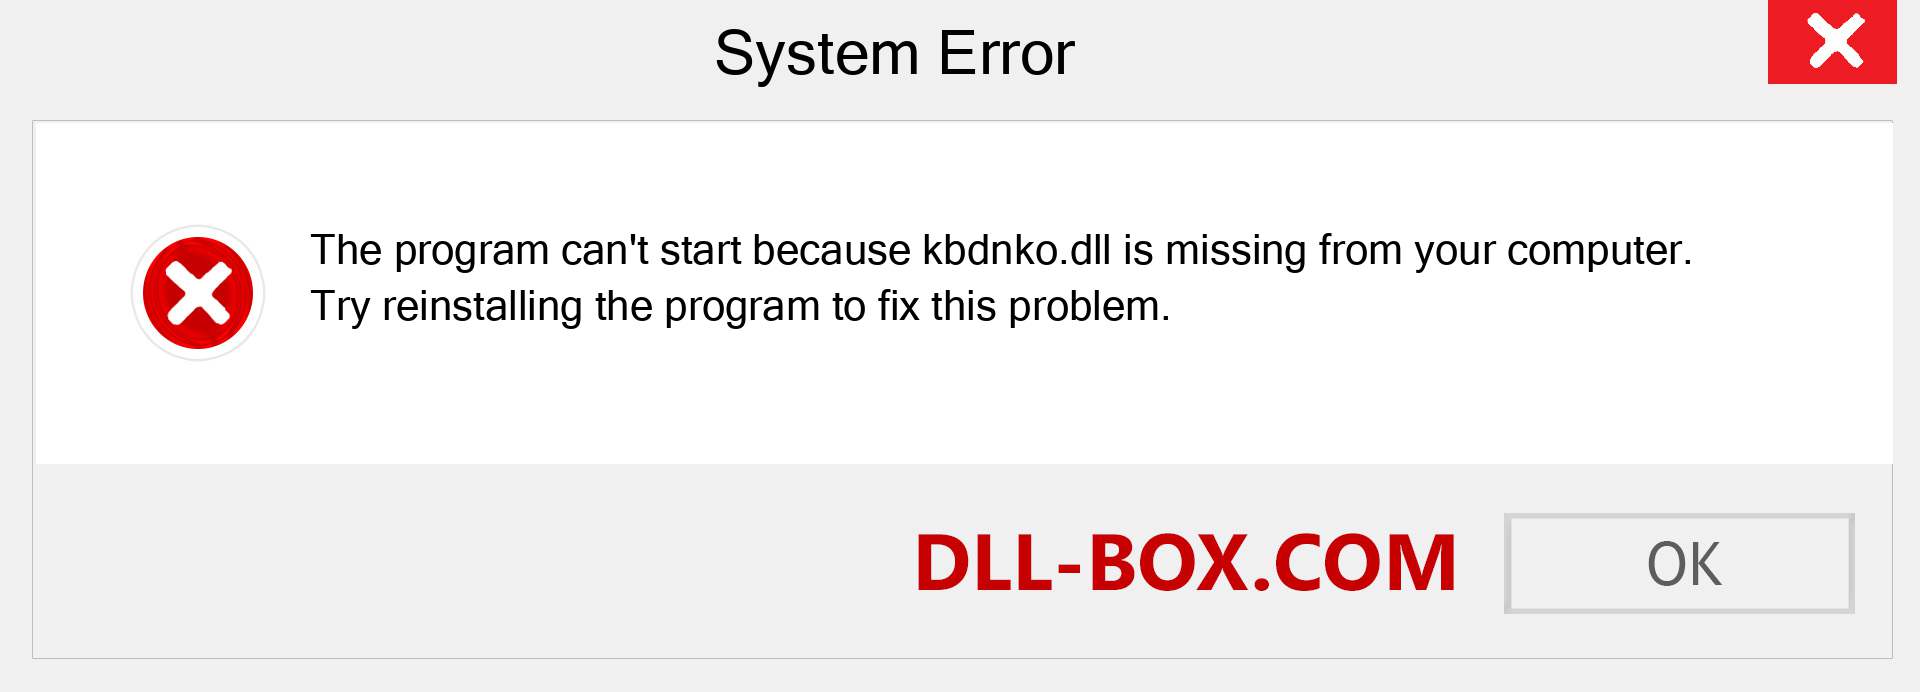  kbdnko.dll file is missing?. Download for Windows 7, 8, 10 - Fix  kbdnko dll Missing Error on Windows, photos, images